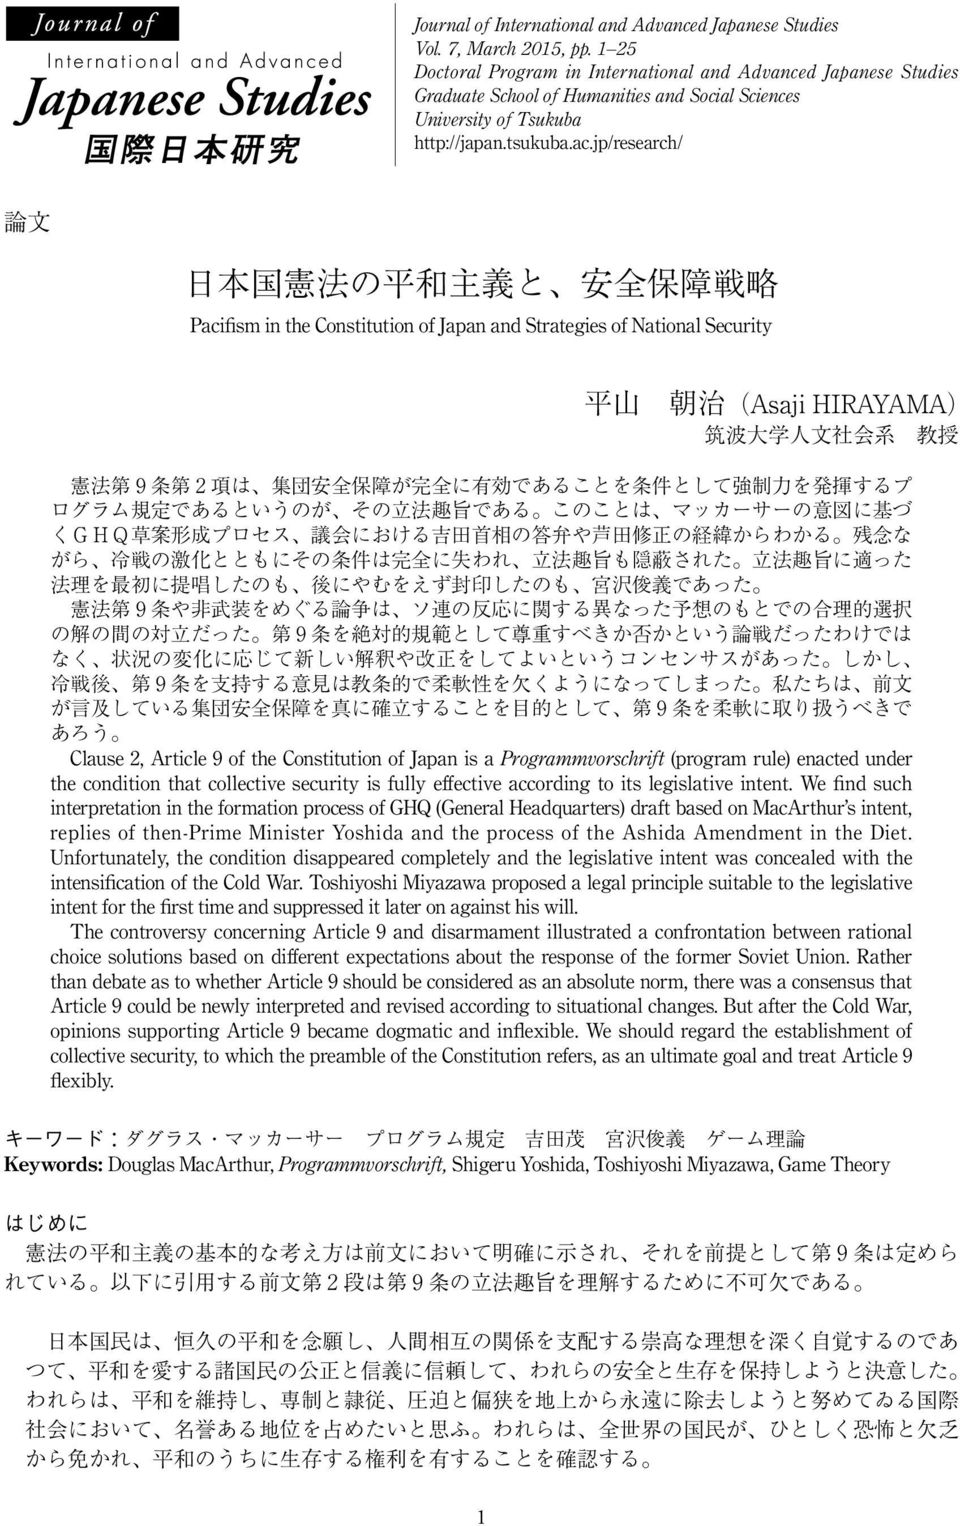 jp/research/ Pacifism in the Constitution of Japan and Strategies of National Security Asaji HIRAYAMA Clause 2, Article 9 of the Constitution of Japan is a Programmvorschrift (program rule) enacted